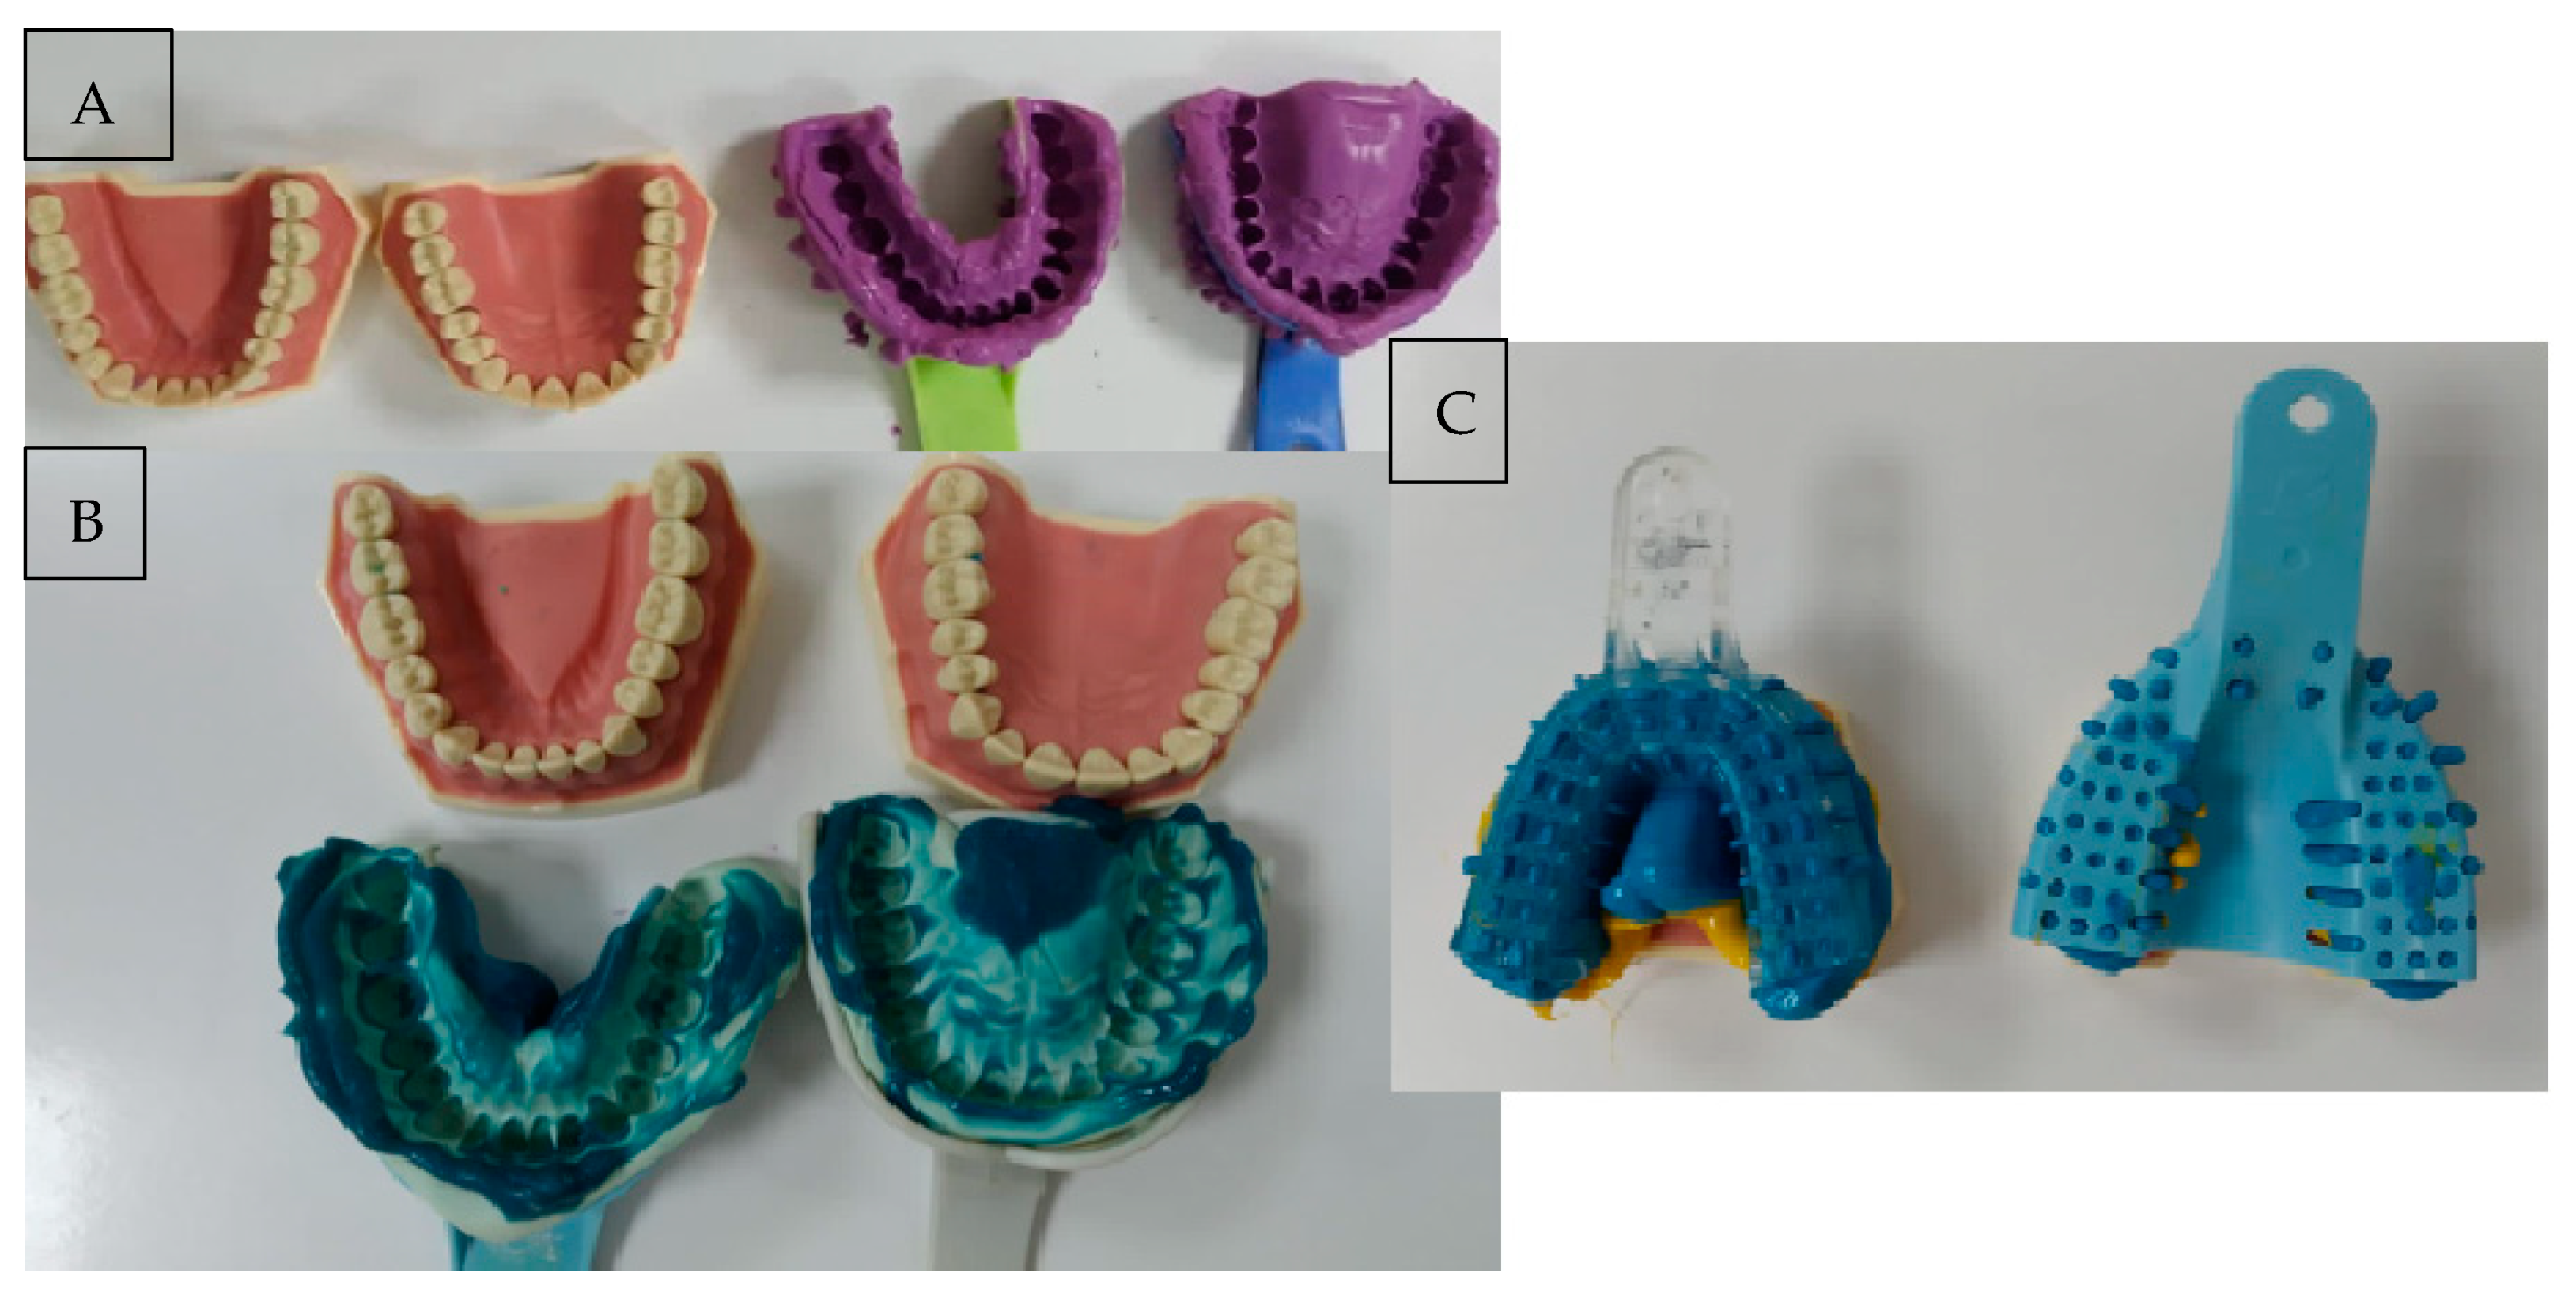 Impression Materials – Non-elastic – My Dental Technology Notes